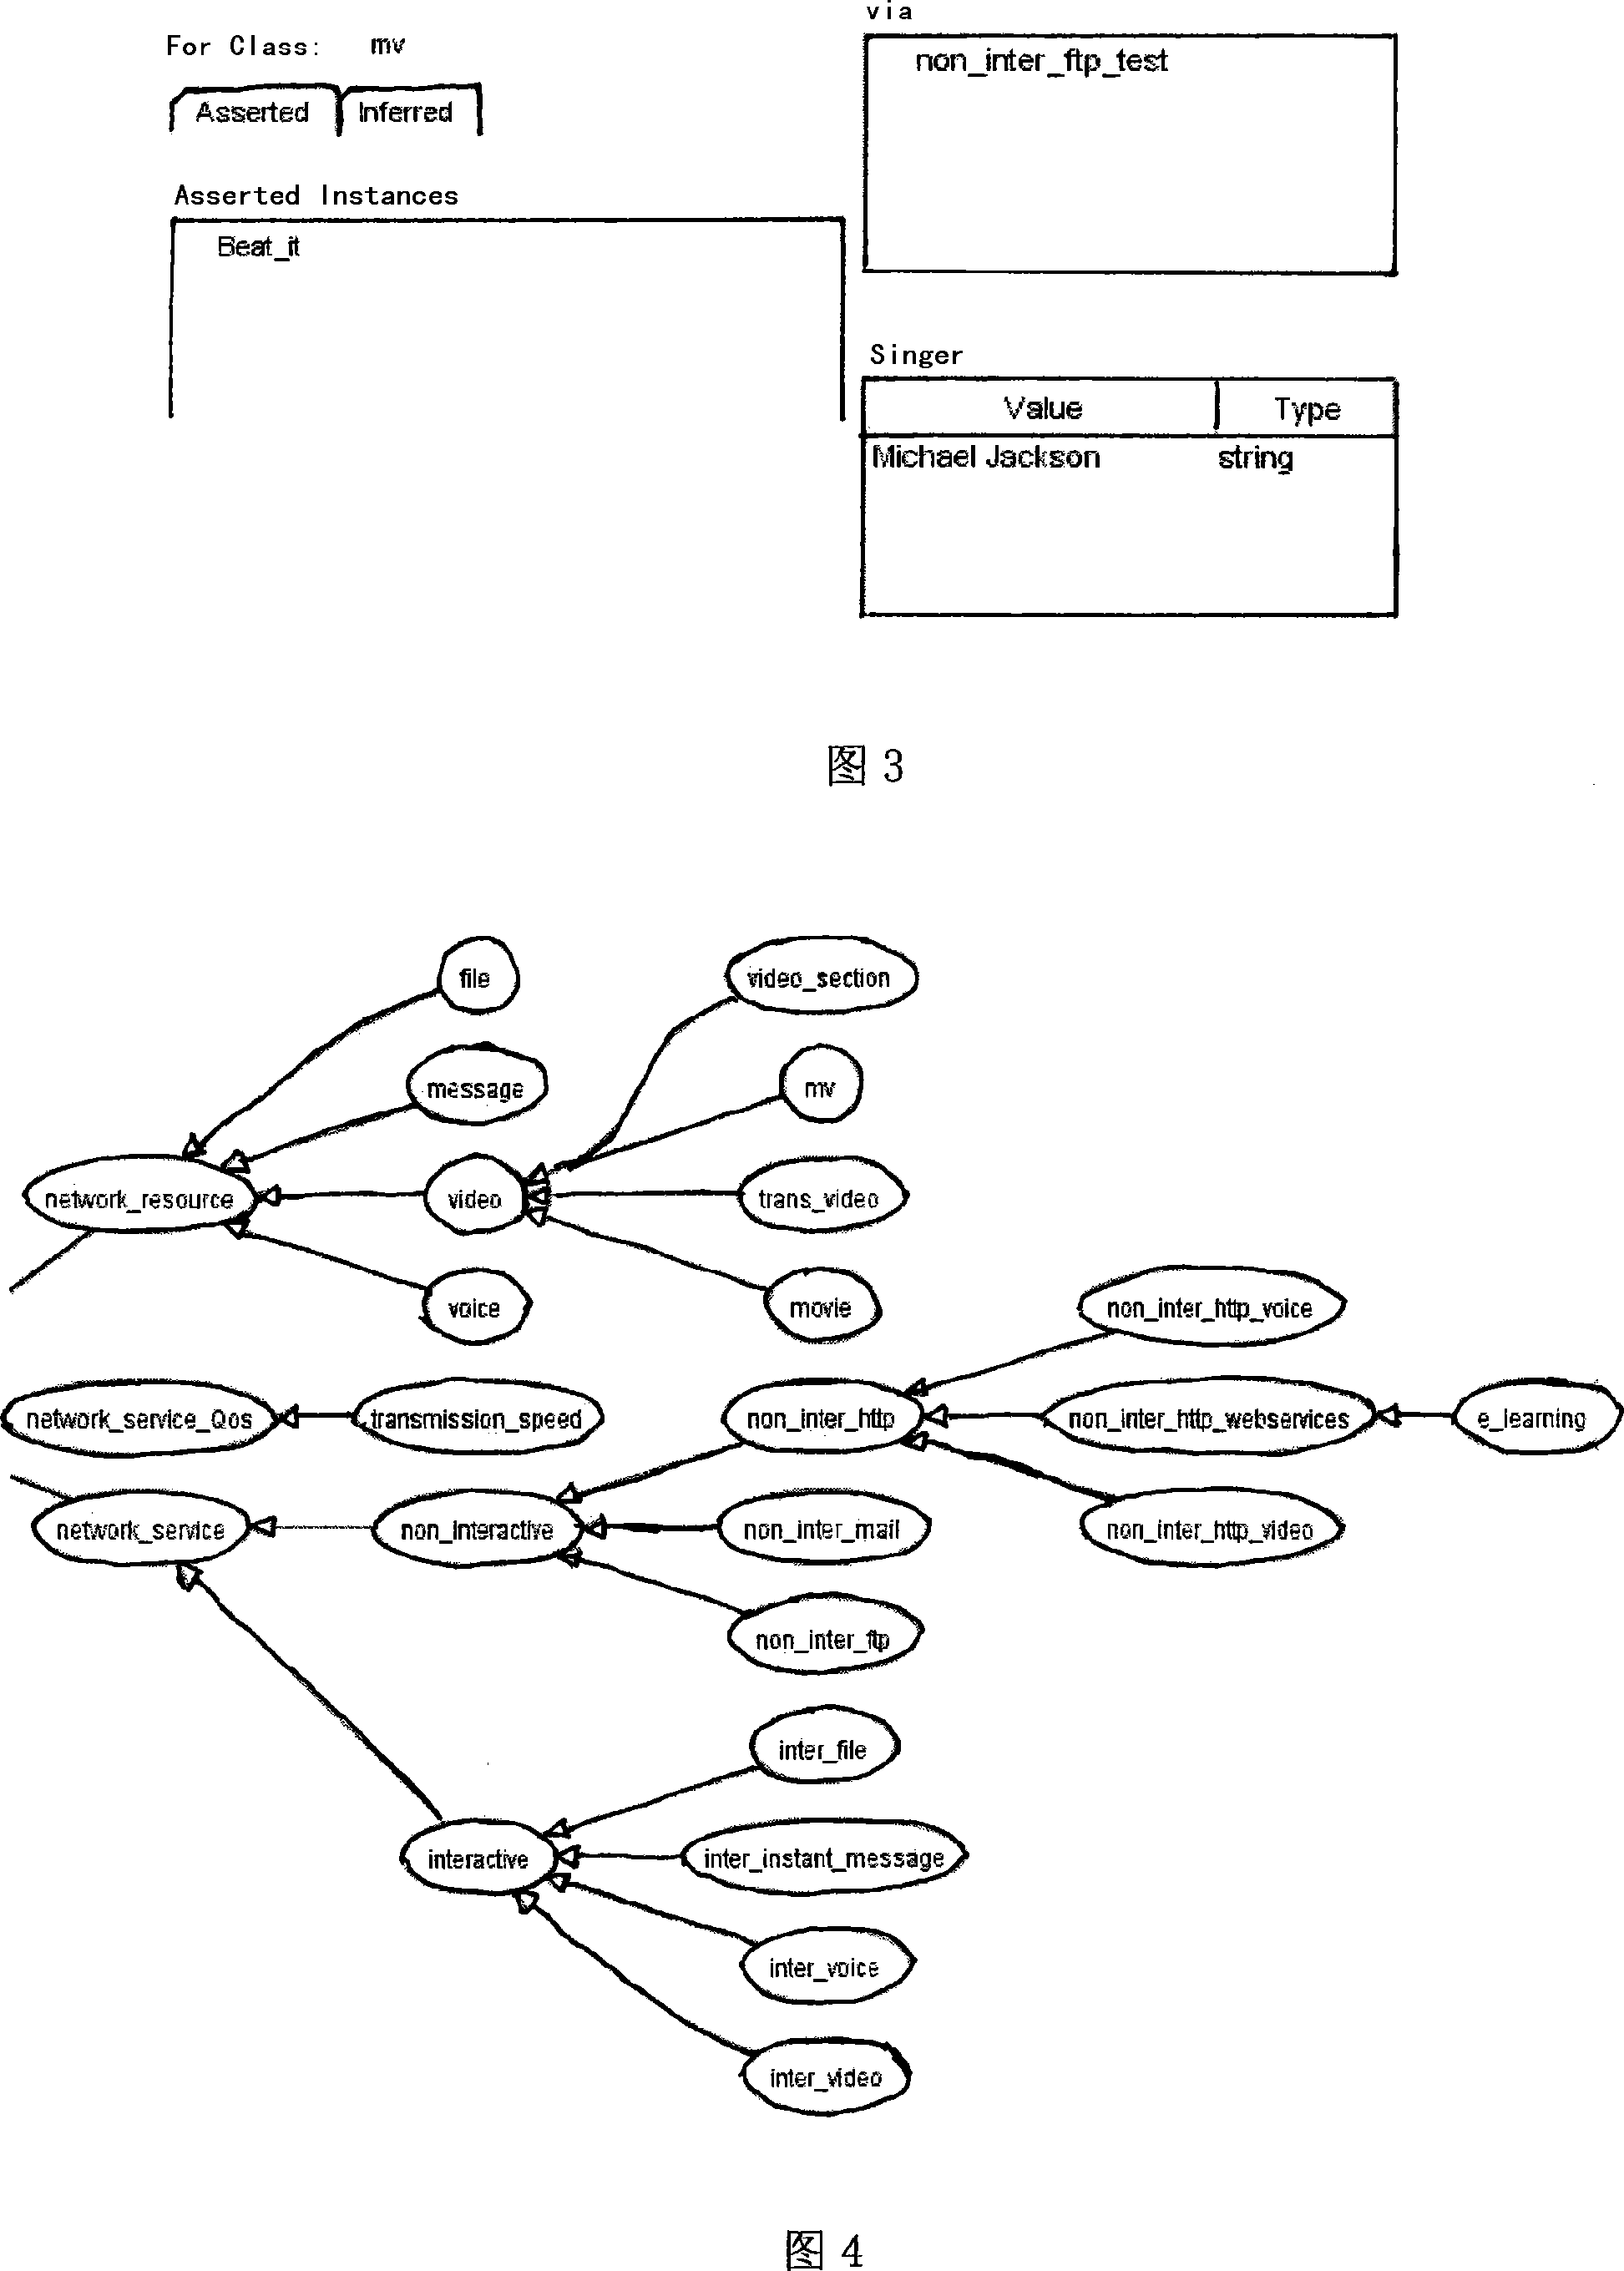 Network resource and service united describing method